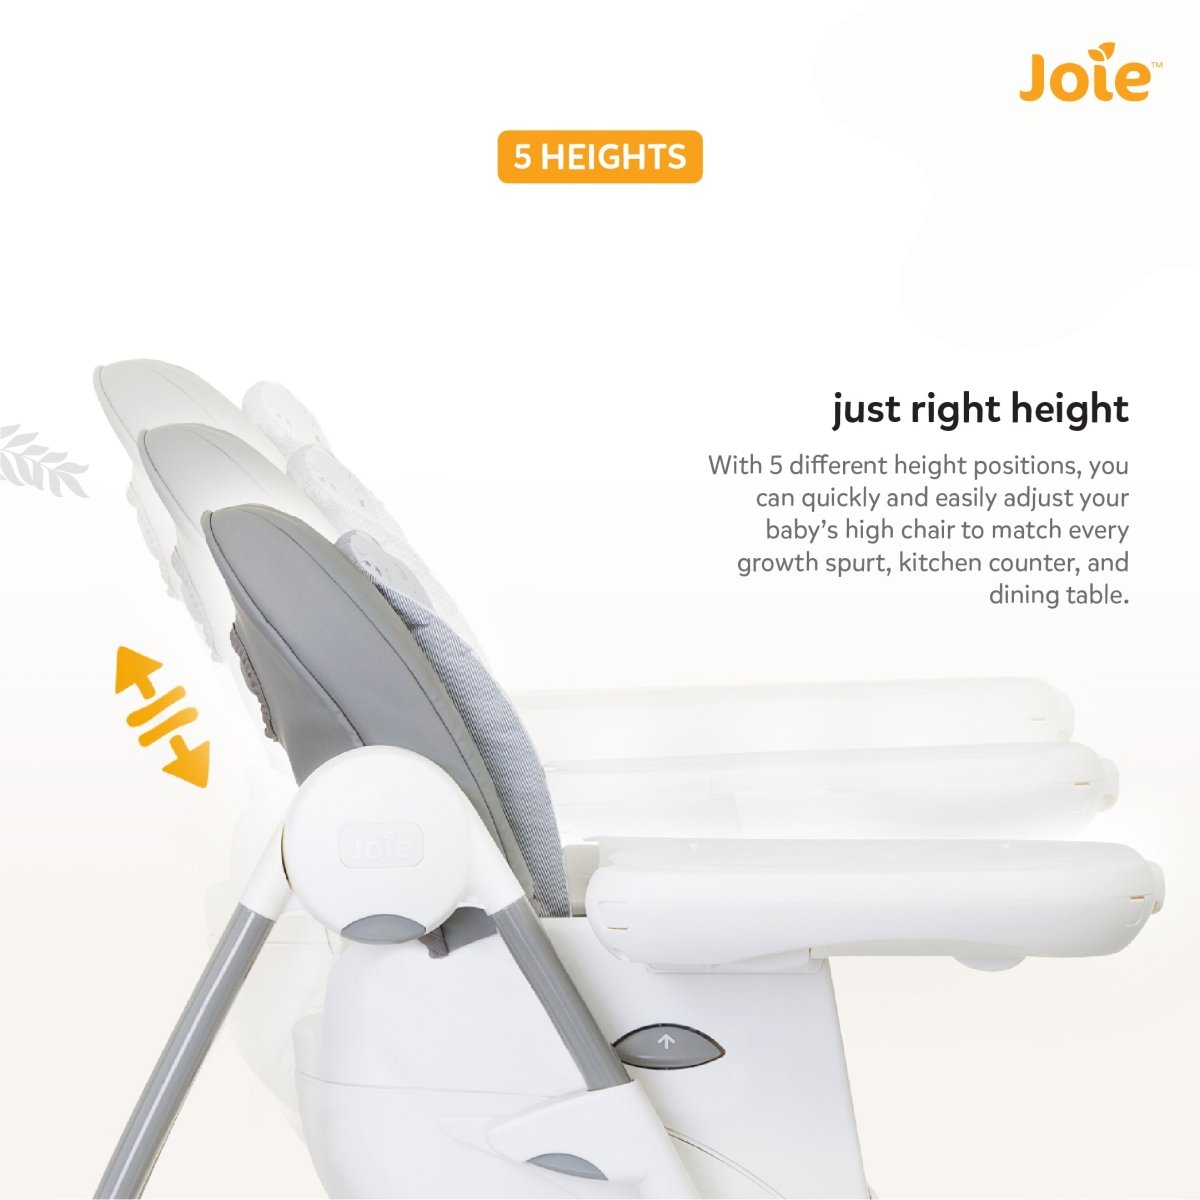 Joie Multiply 6 In1 Portrait High Chair- Basic - H1605AAPOR000